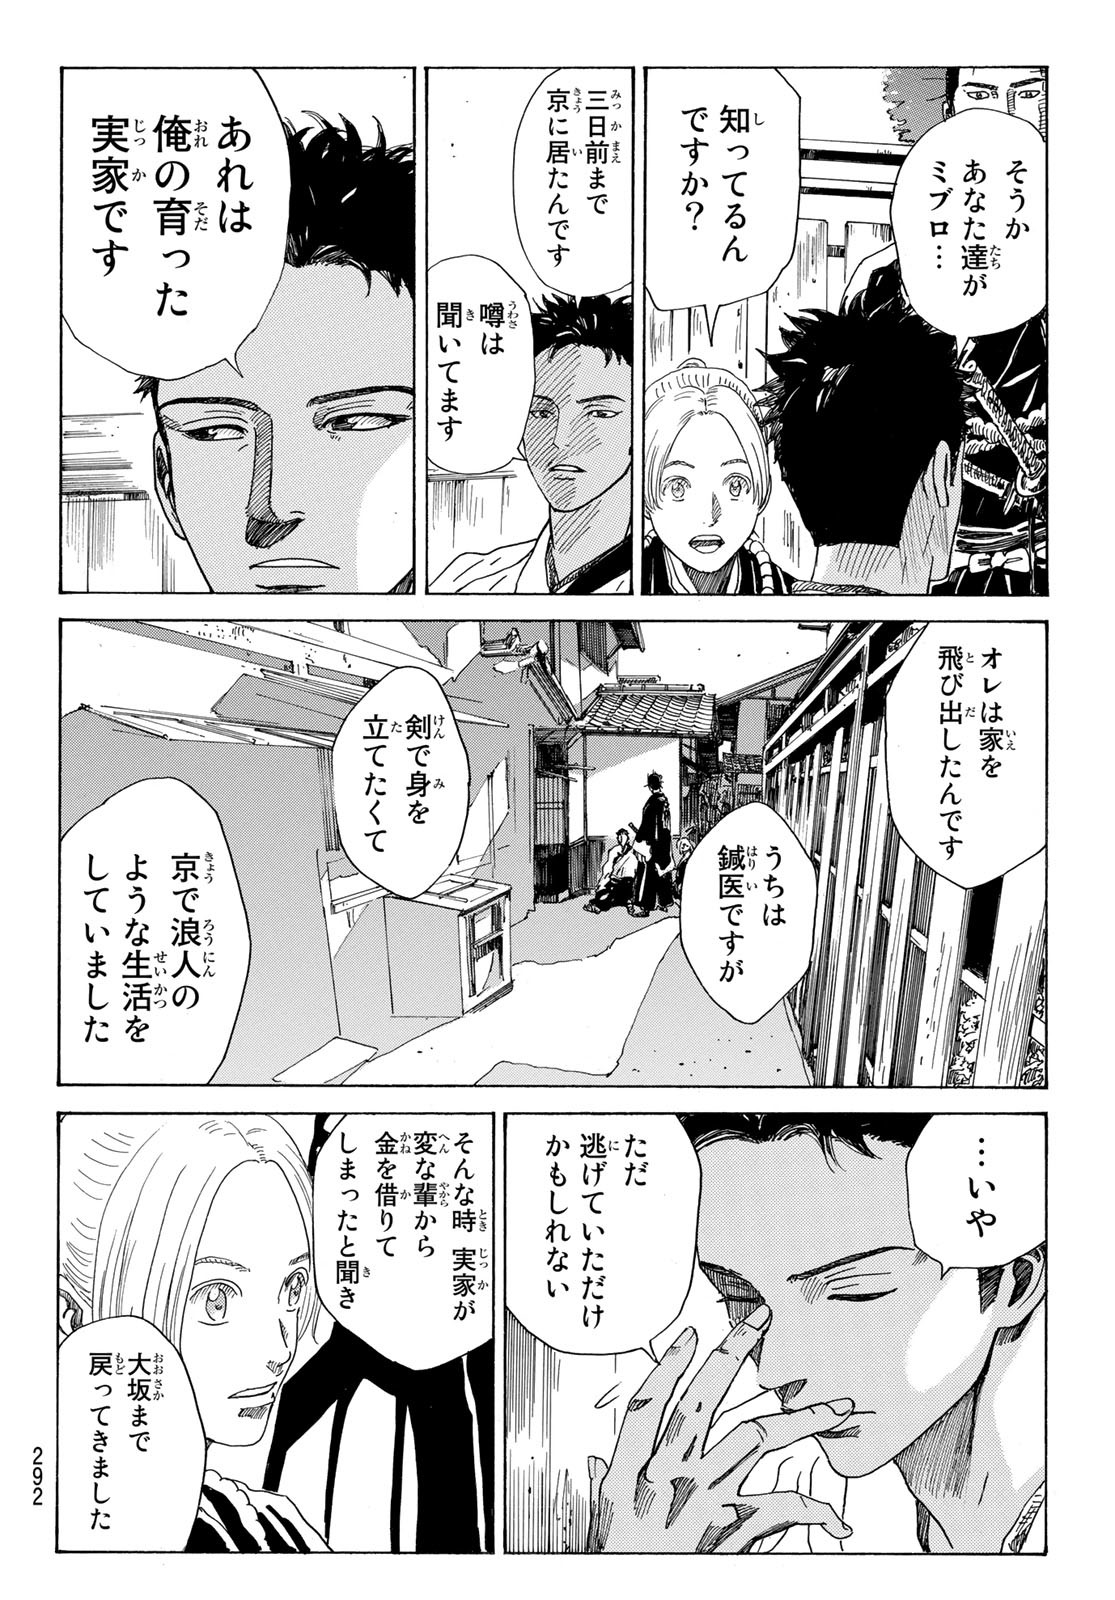 An Mo Miburo 第73話 - Page 18